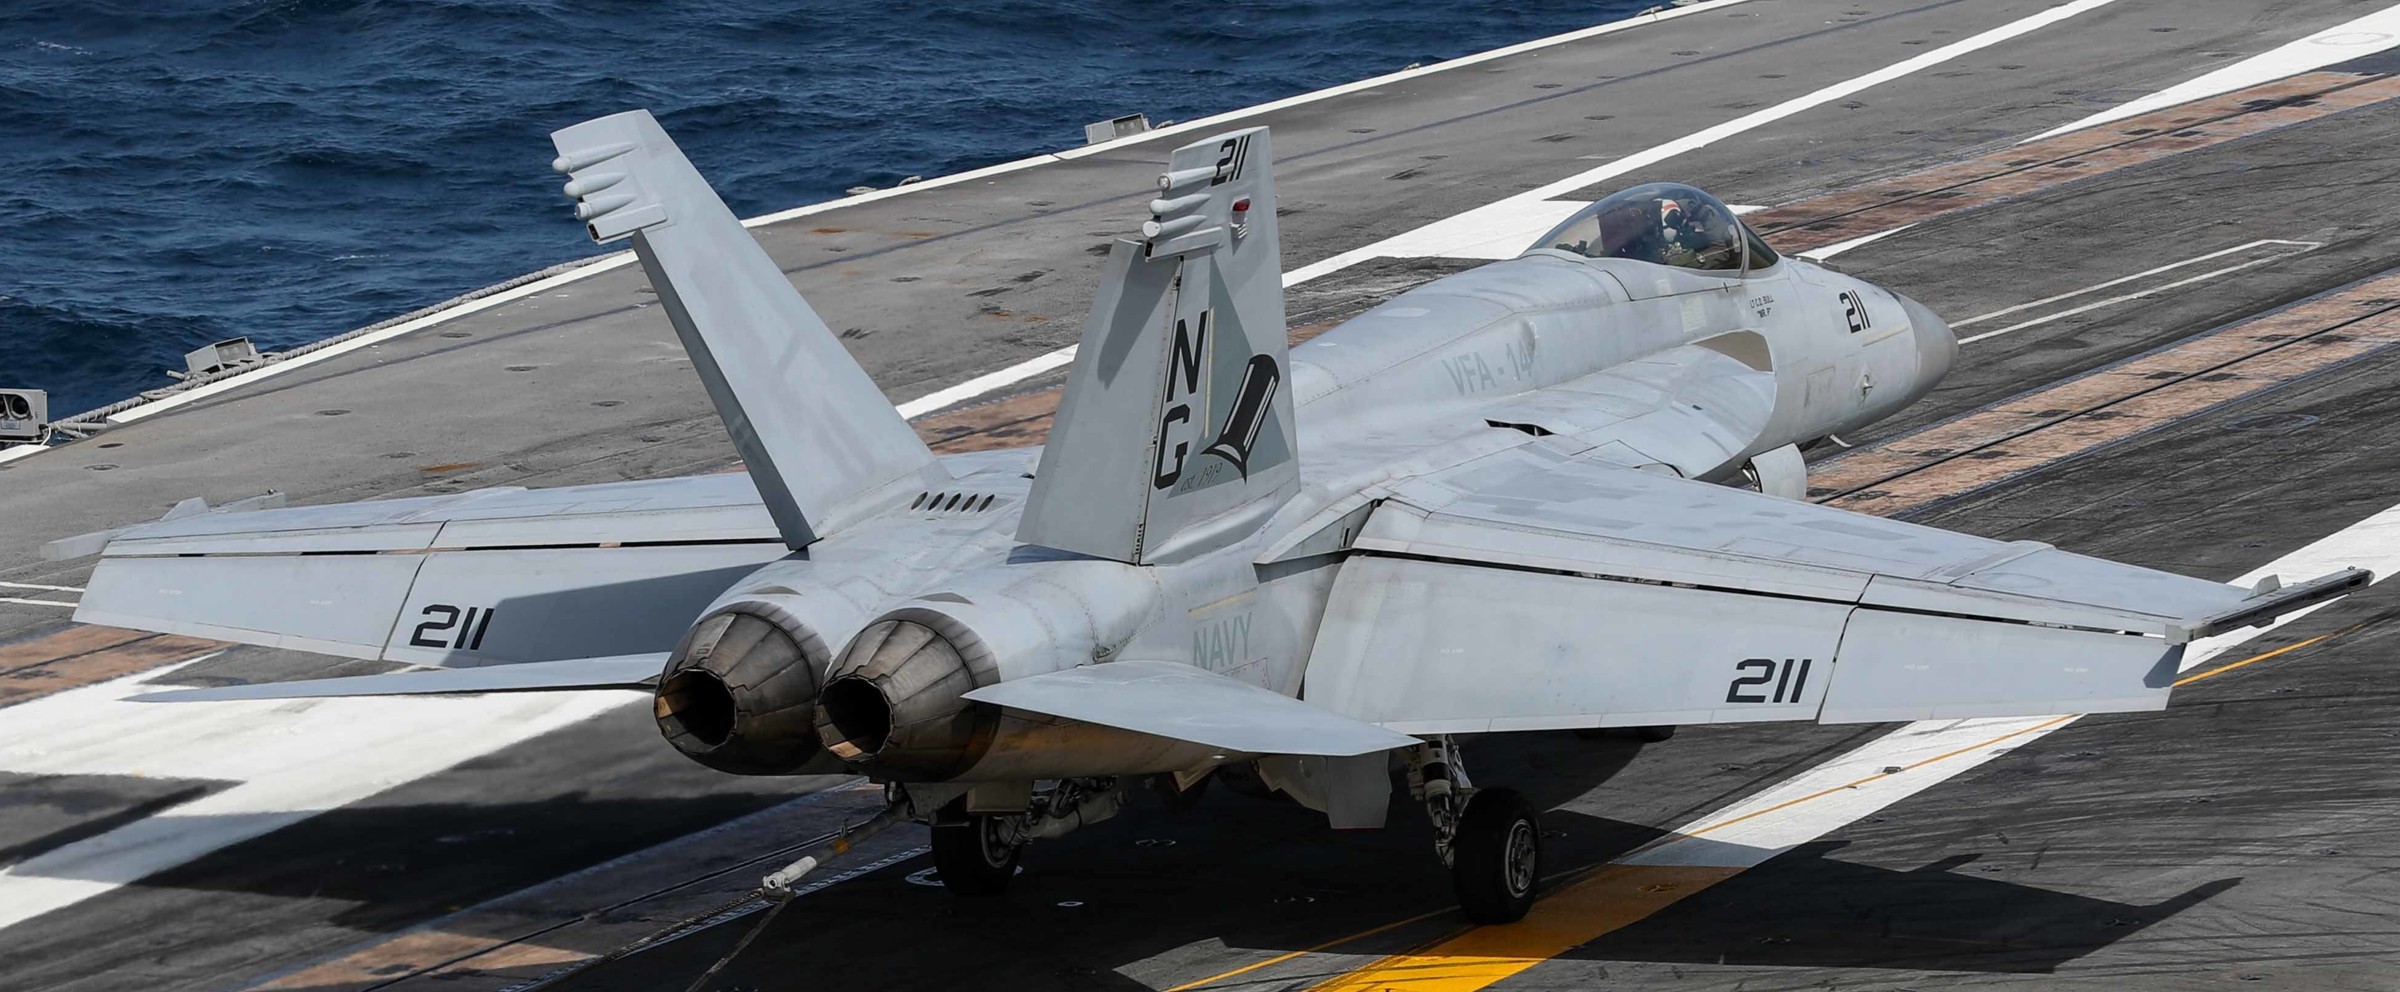 vfa-14 tophatters strike fighter squadron f/a-18e super hornet cvn-72 uss abraham lincoln cvw-9 us navy 43